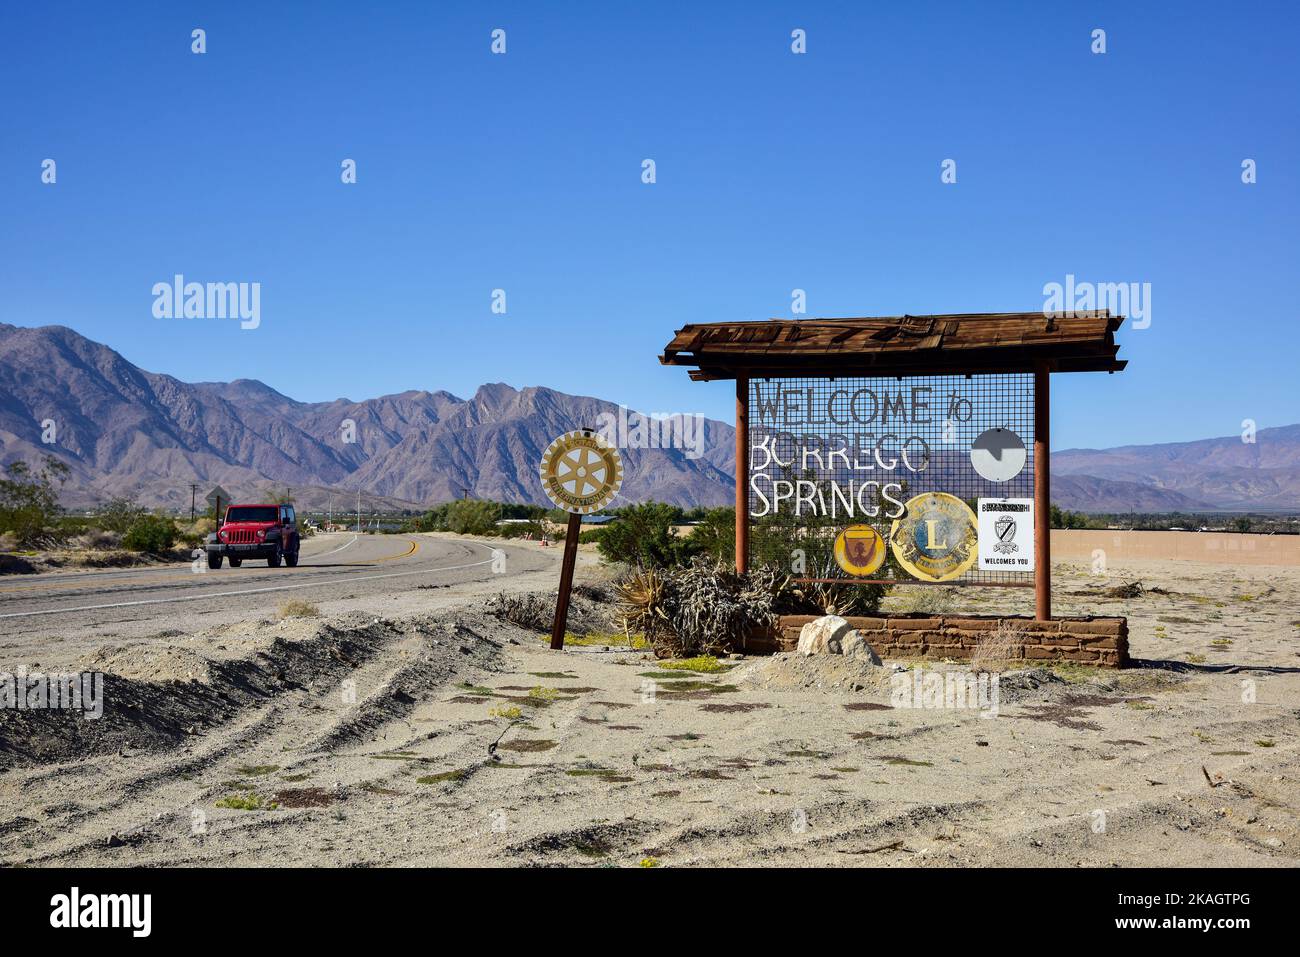 Welcome to Borrego springs Sign Stock Photo